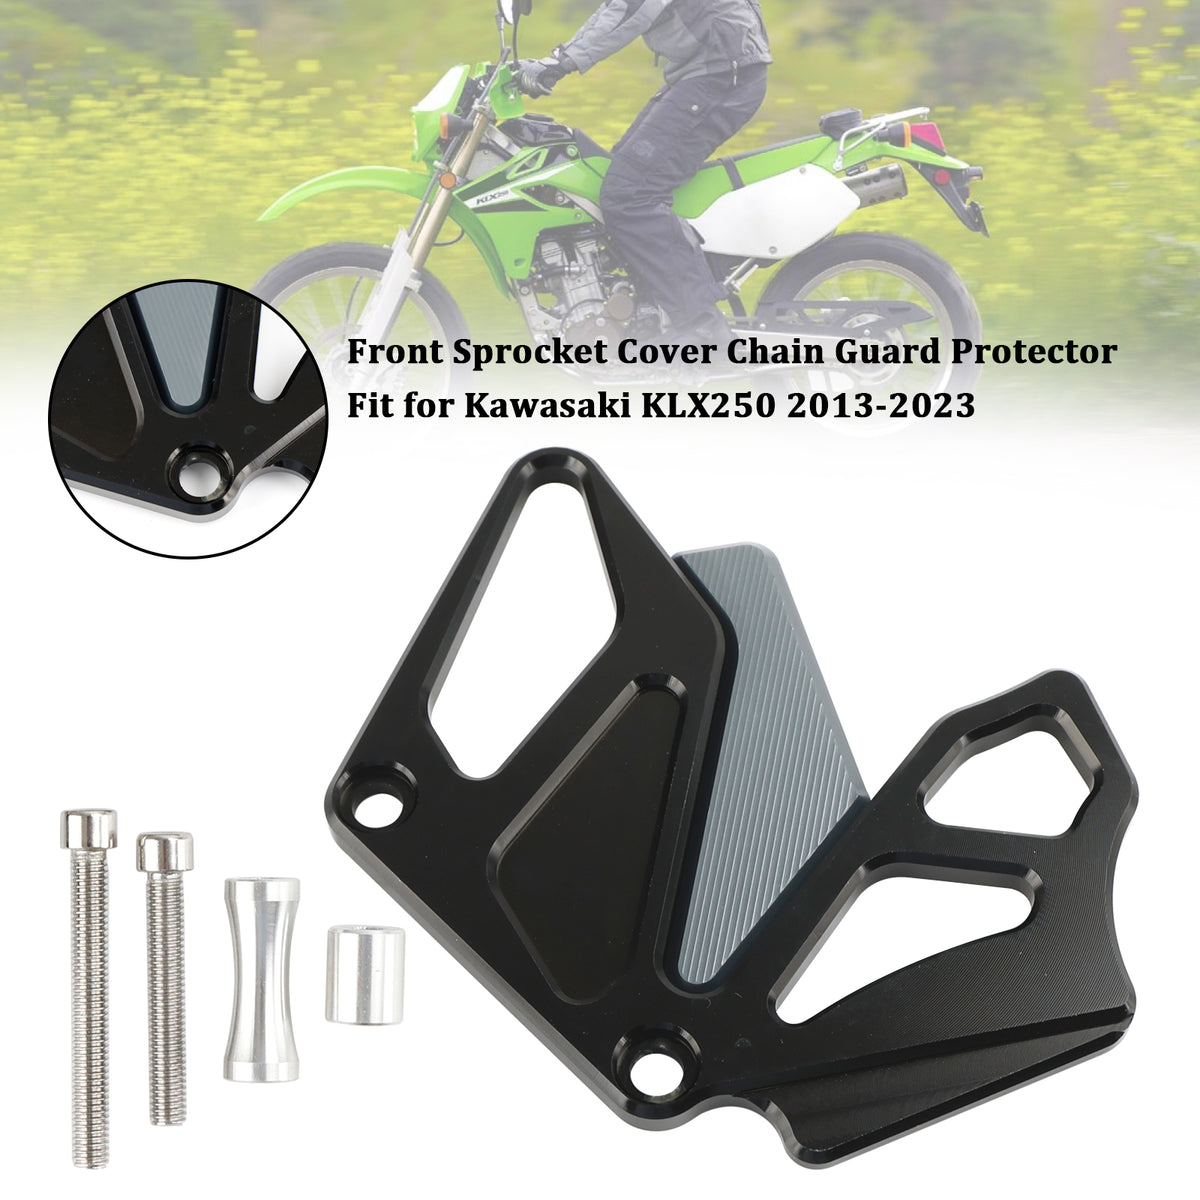 Front Sprocket Cover Chain Guard Protector For Kawasaki KLX250 2013-2023